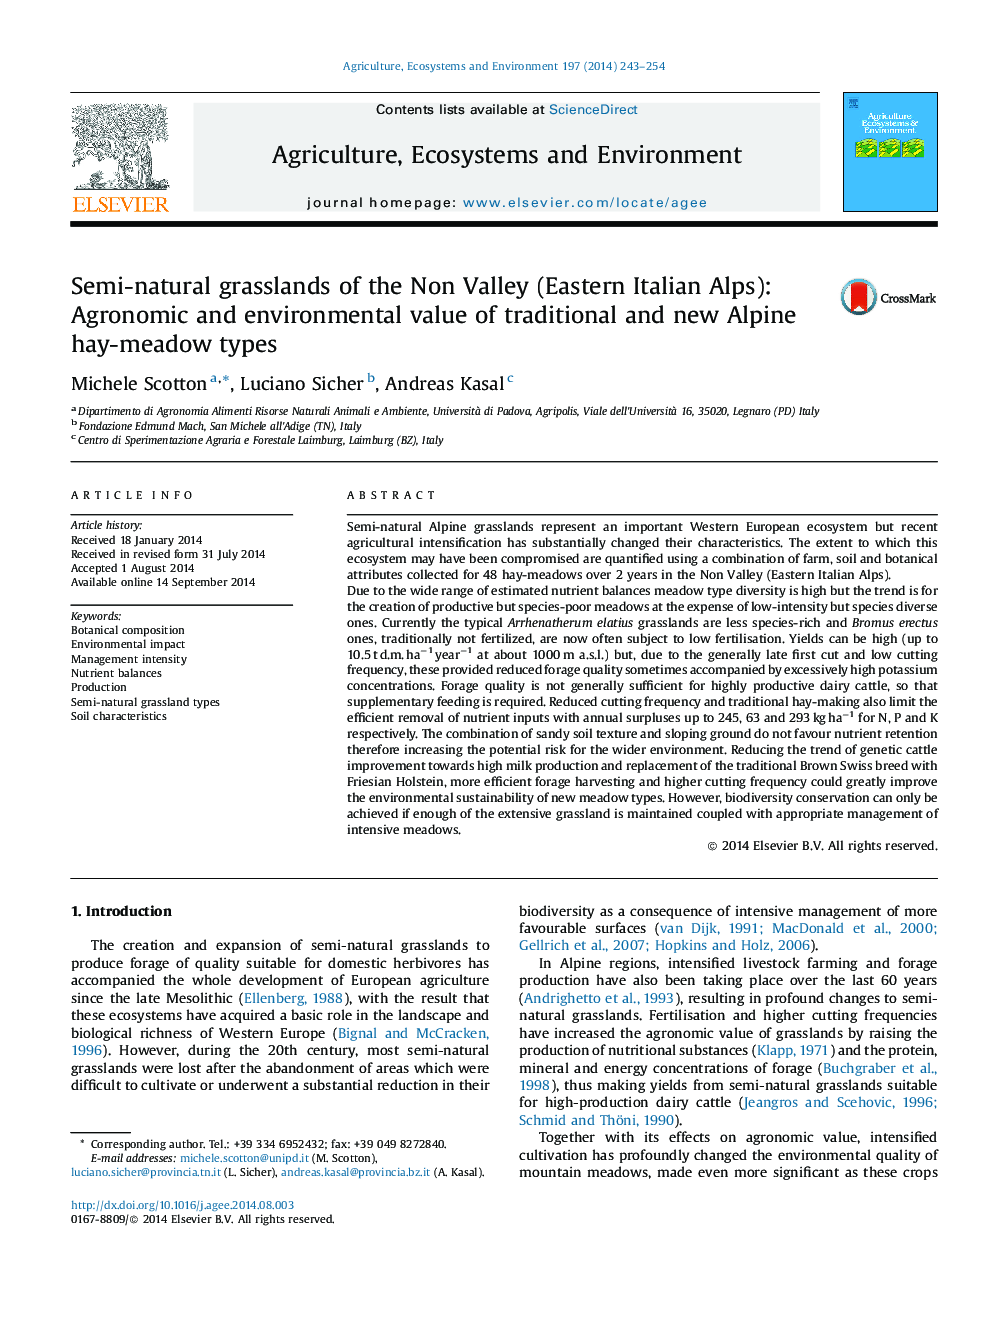 Semi-natural grasslands of the Non Valley (Eastern Italian Alps): Agronomic and environmental value of traditional and new Alpine hay-meadow types